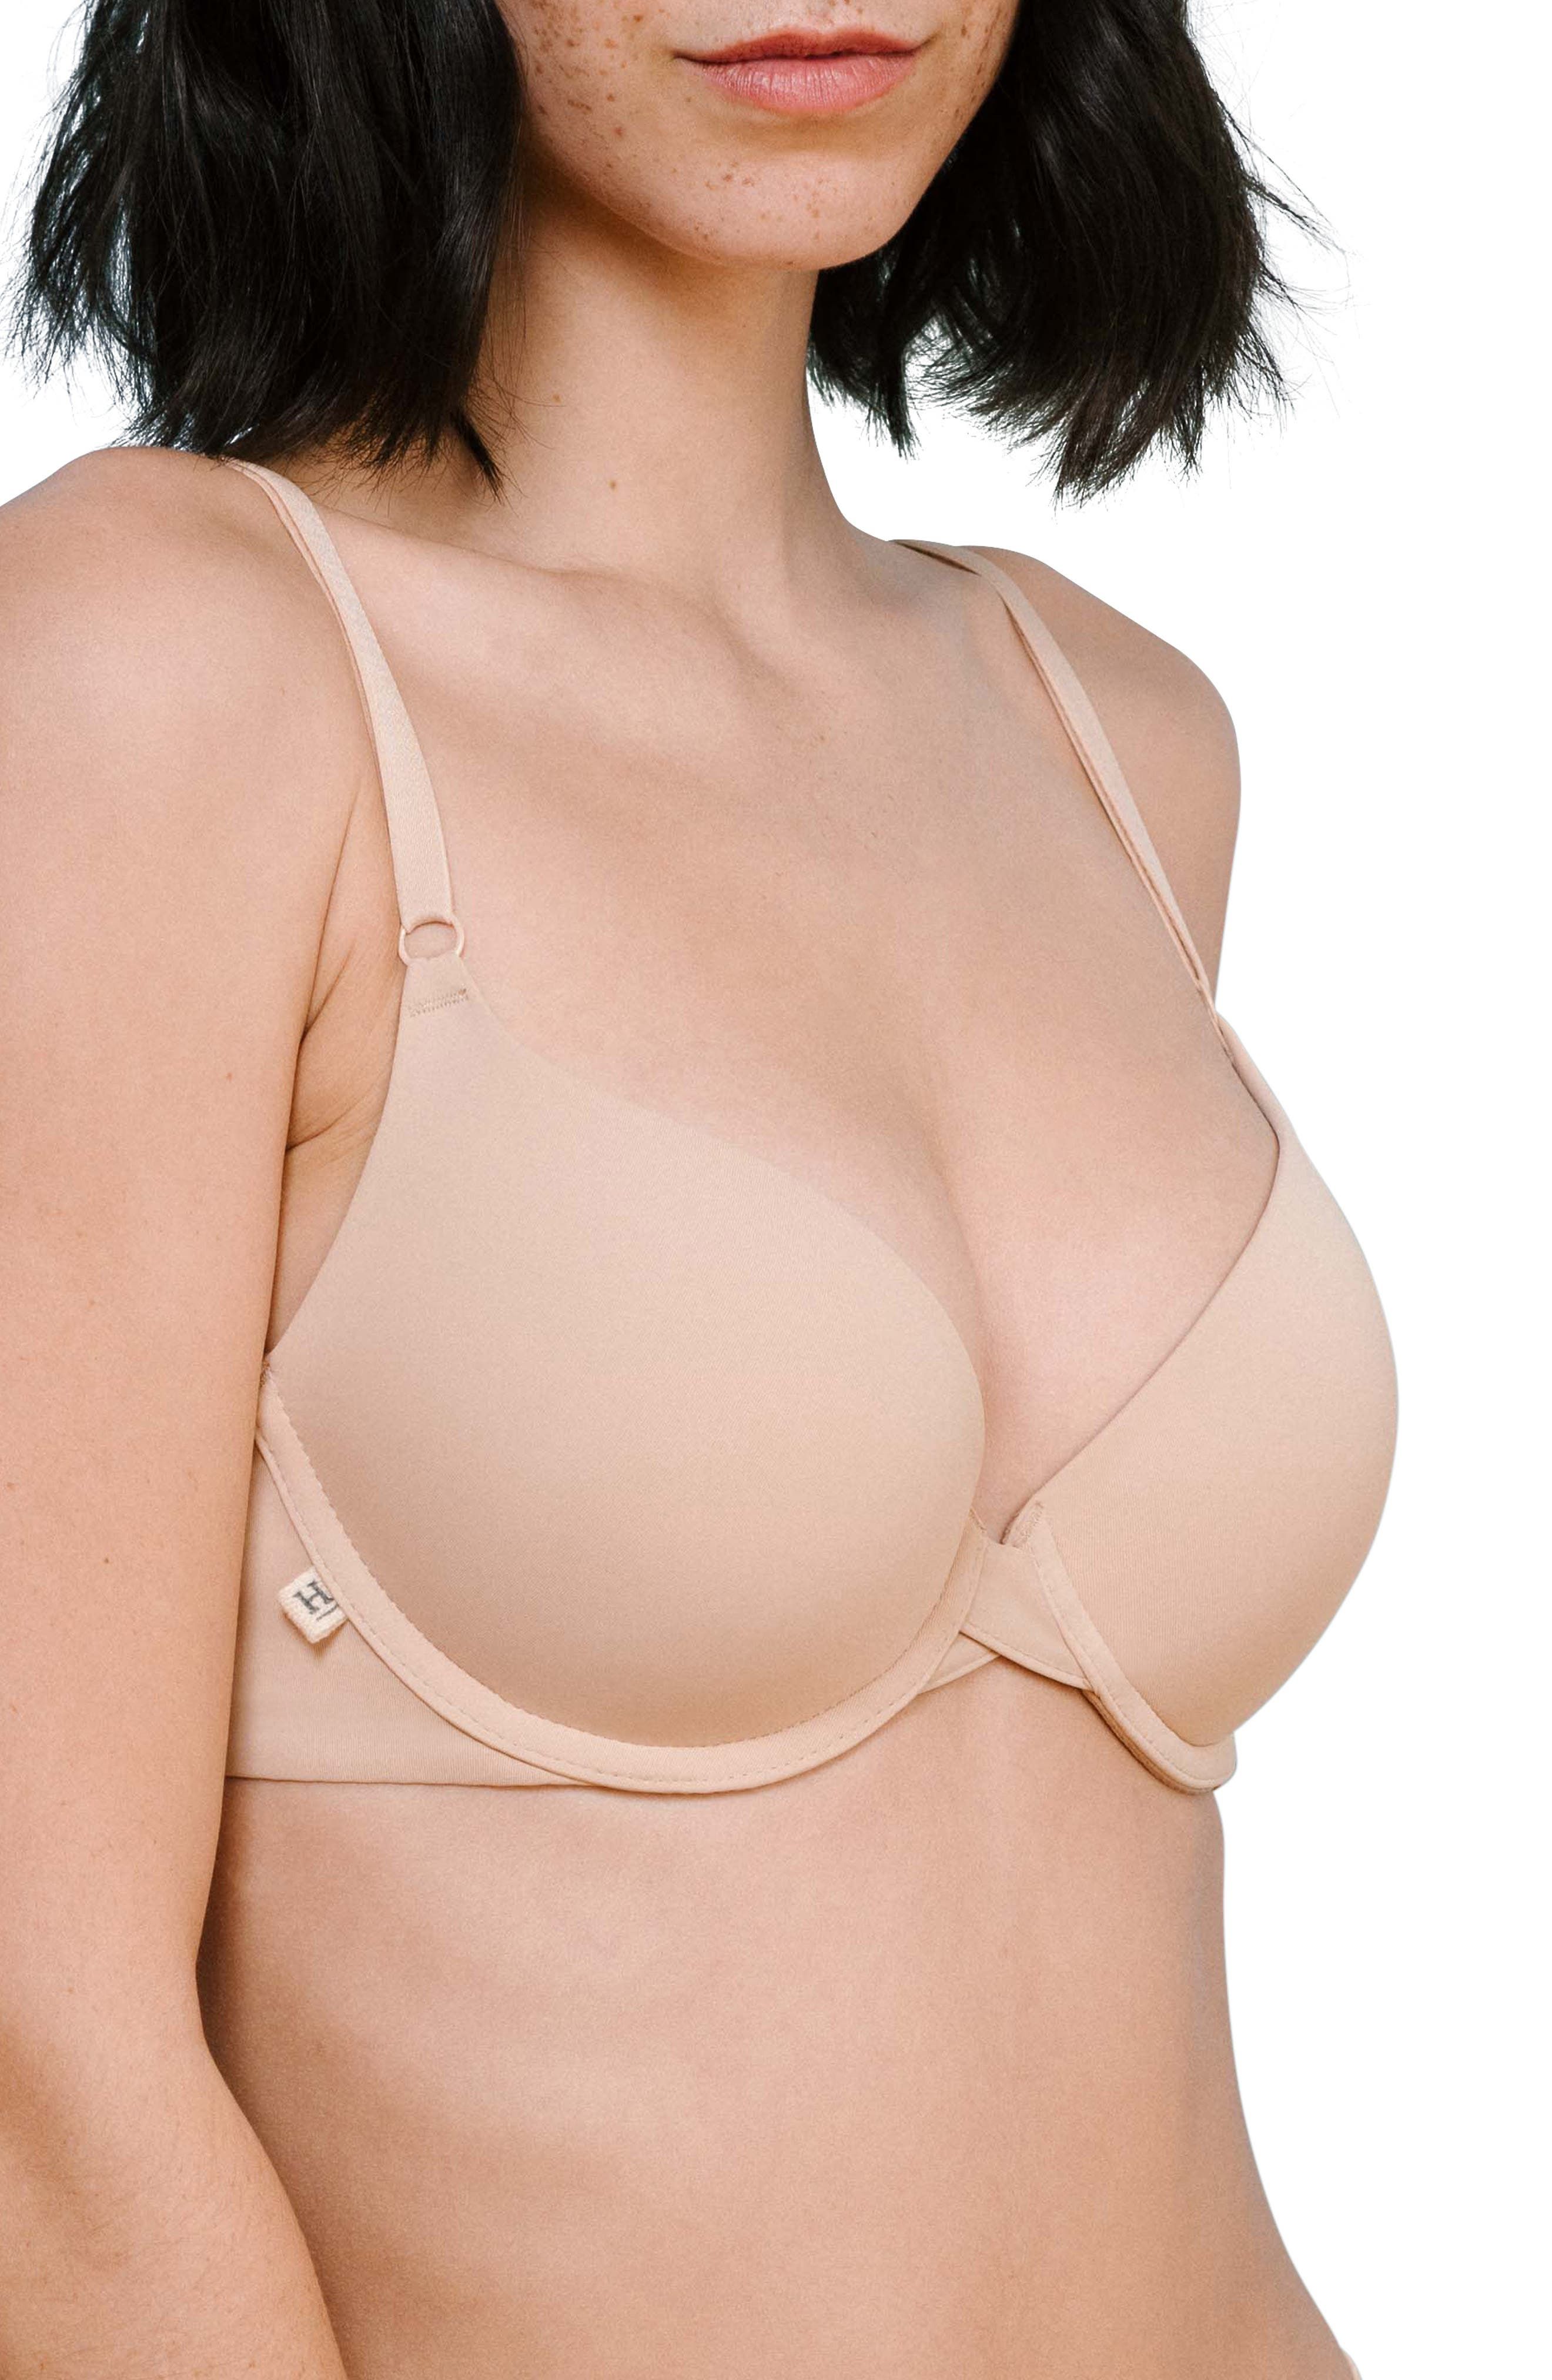 Cotton-Comfort SUPPORT White CLEARANCE! NEW Bra msrp $40 UNDERWIRE Wide-Straps